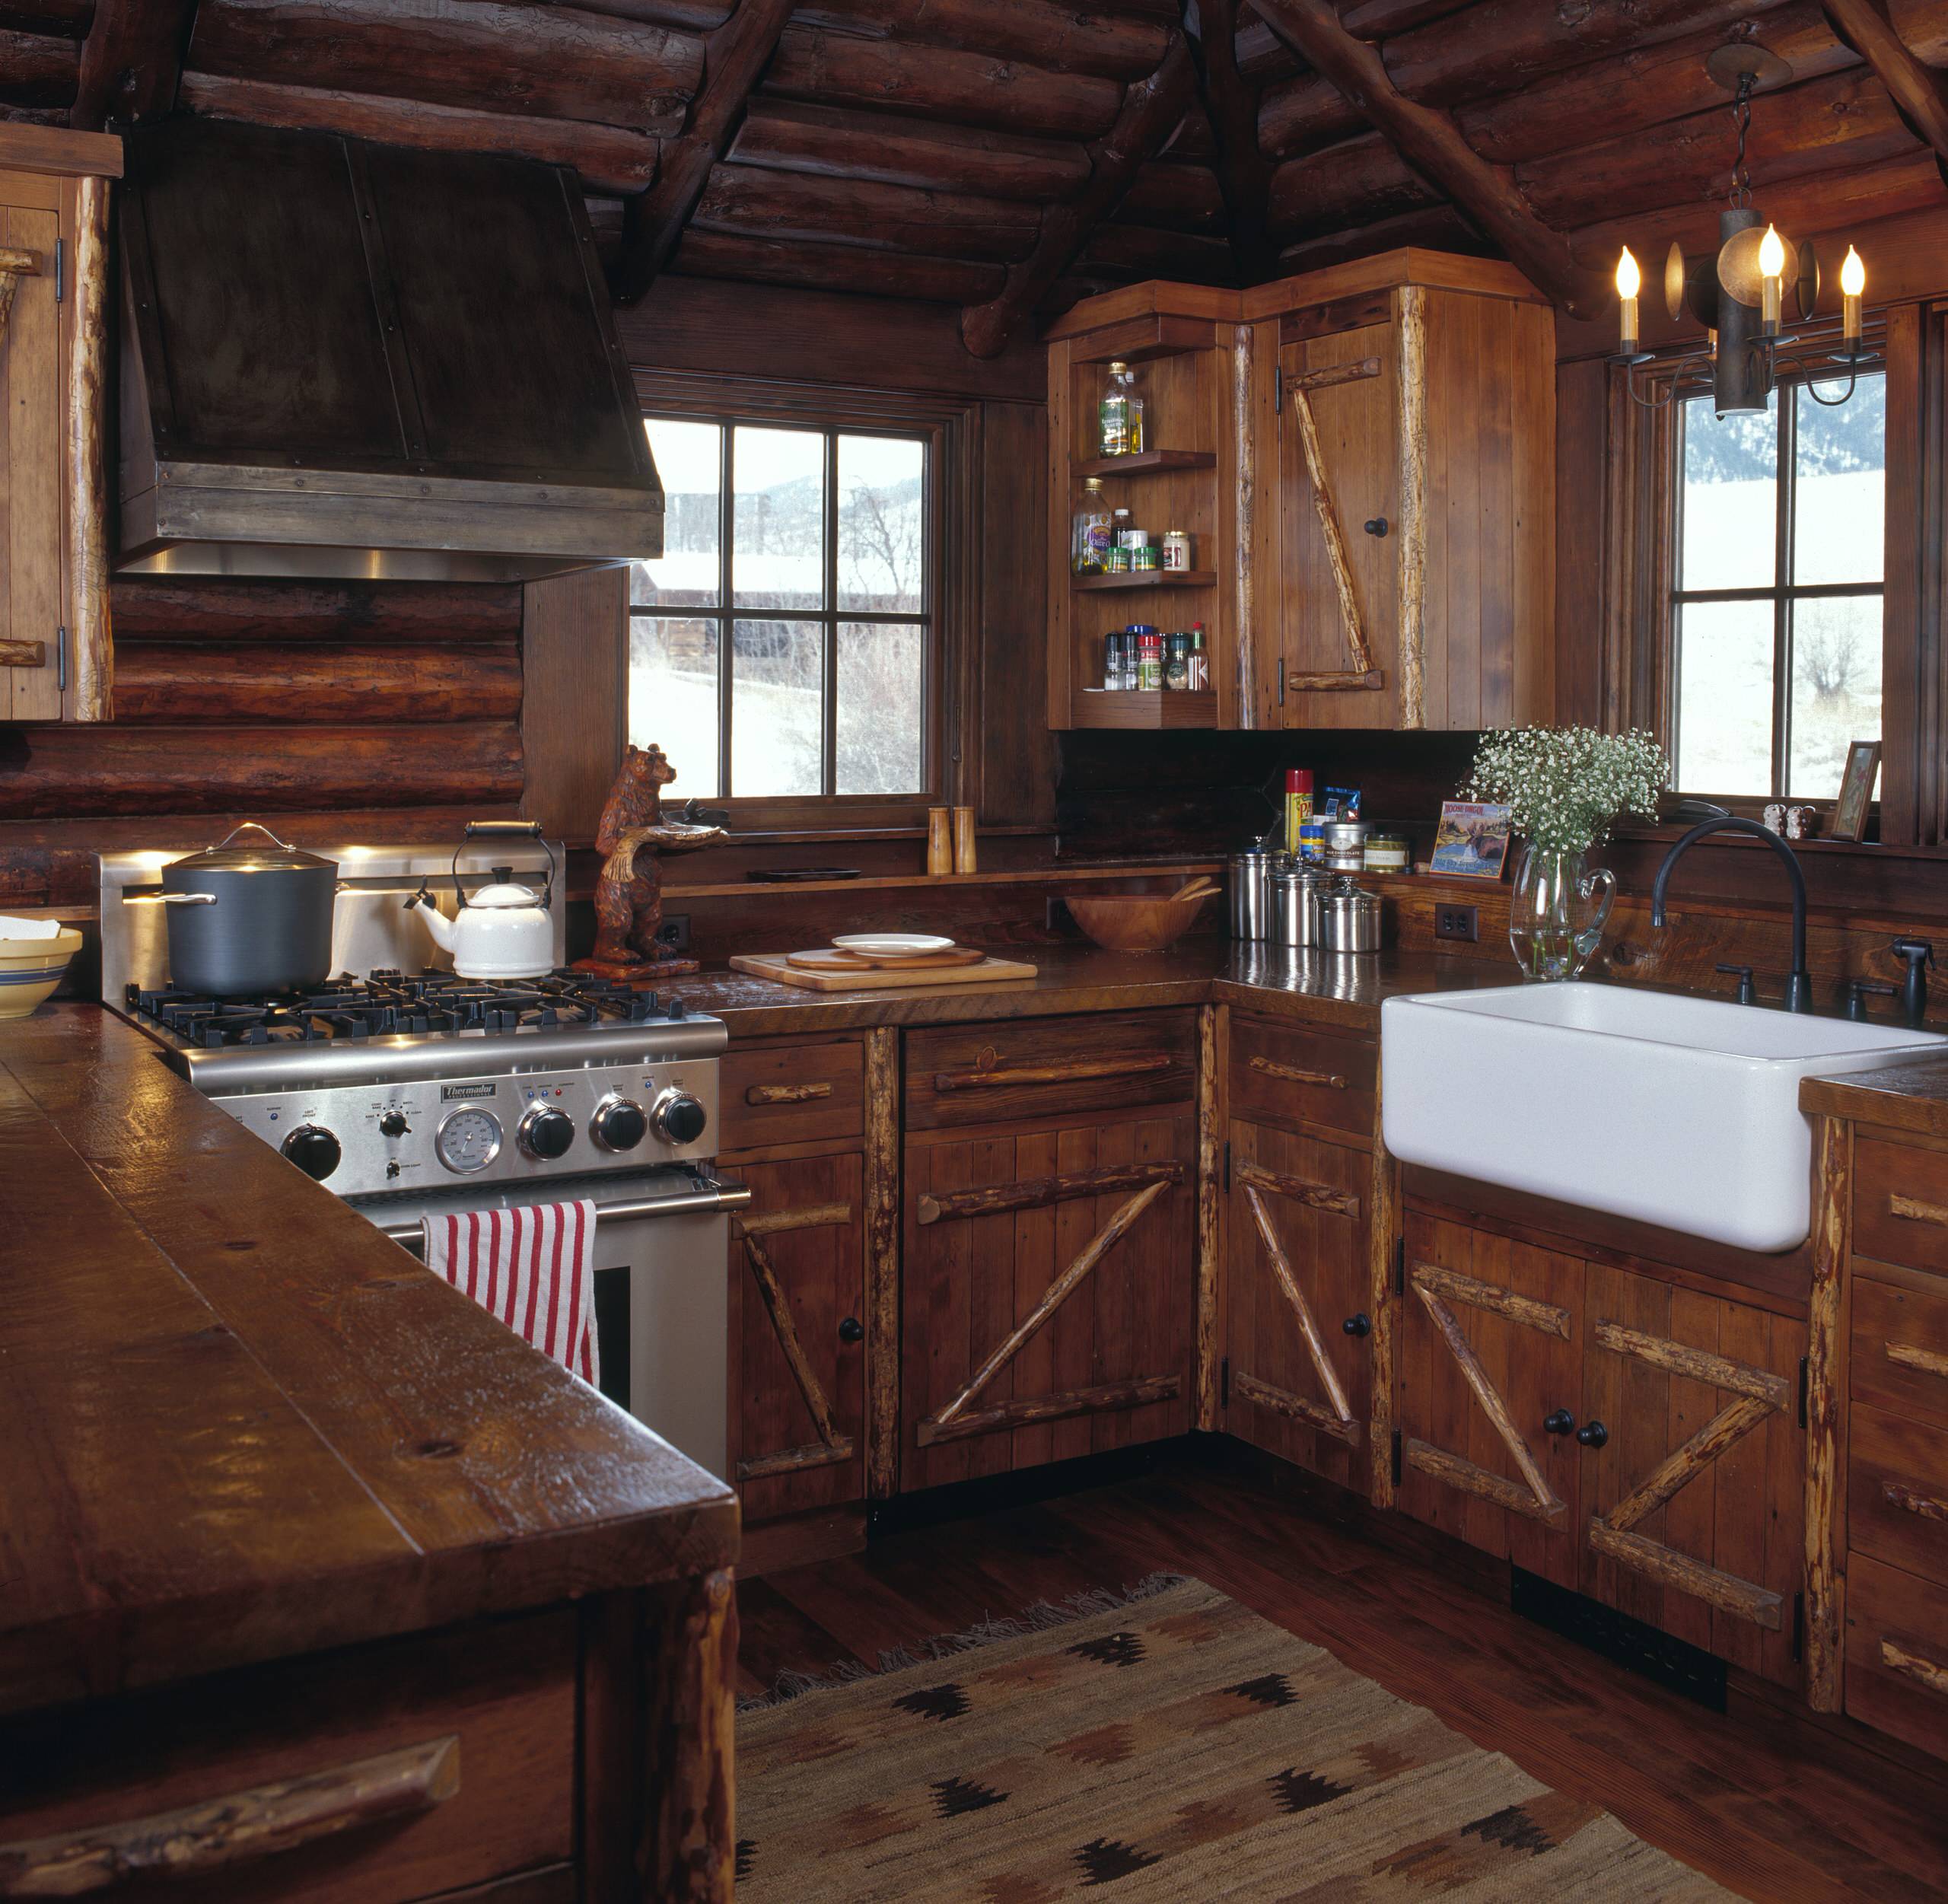 75 Beautiful Small Rustic Kitchen Pictures Ideas July 2021 Houzz